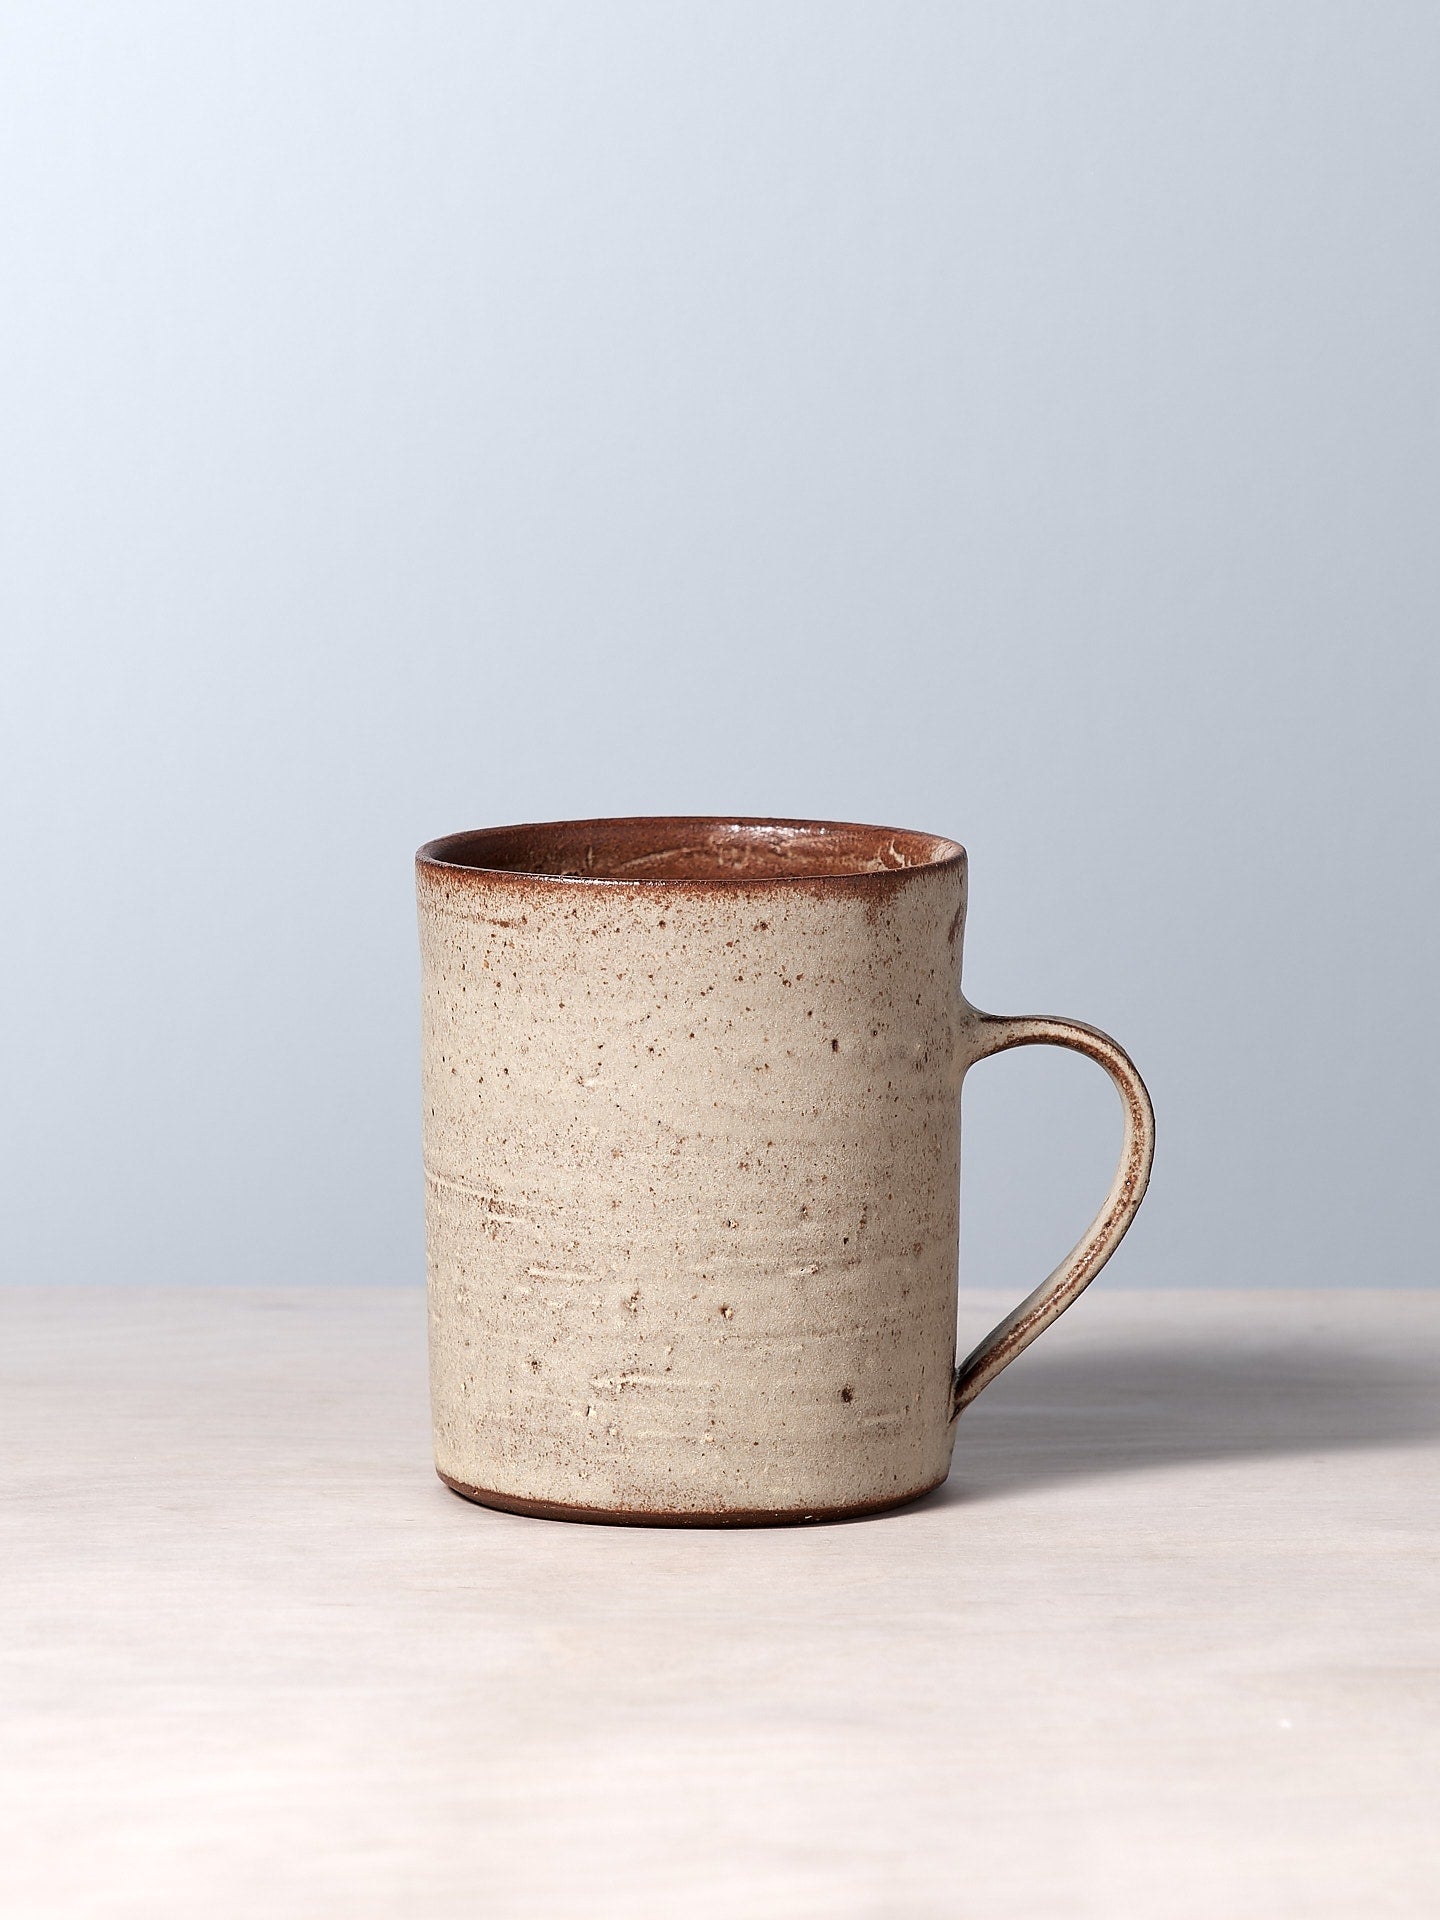 A Zoë Isaacs Mug - Cream sitting on a table with a grey background.